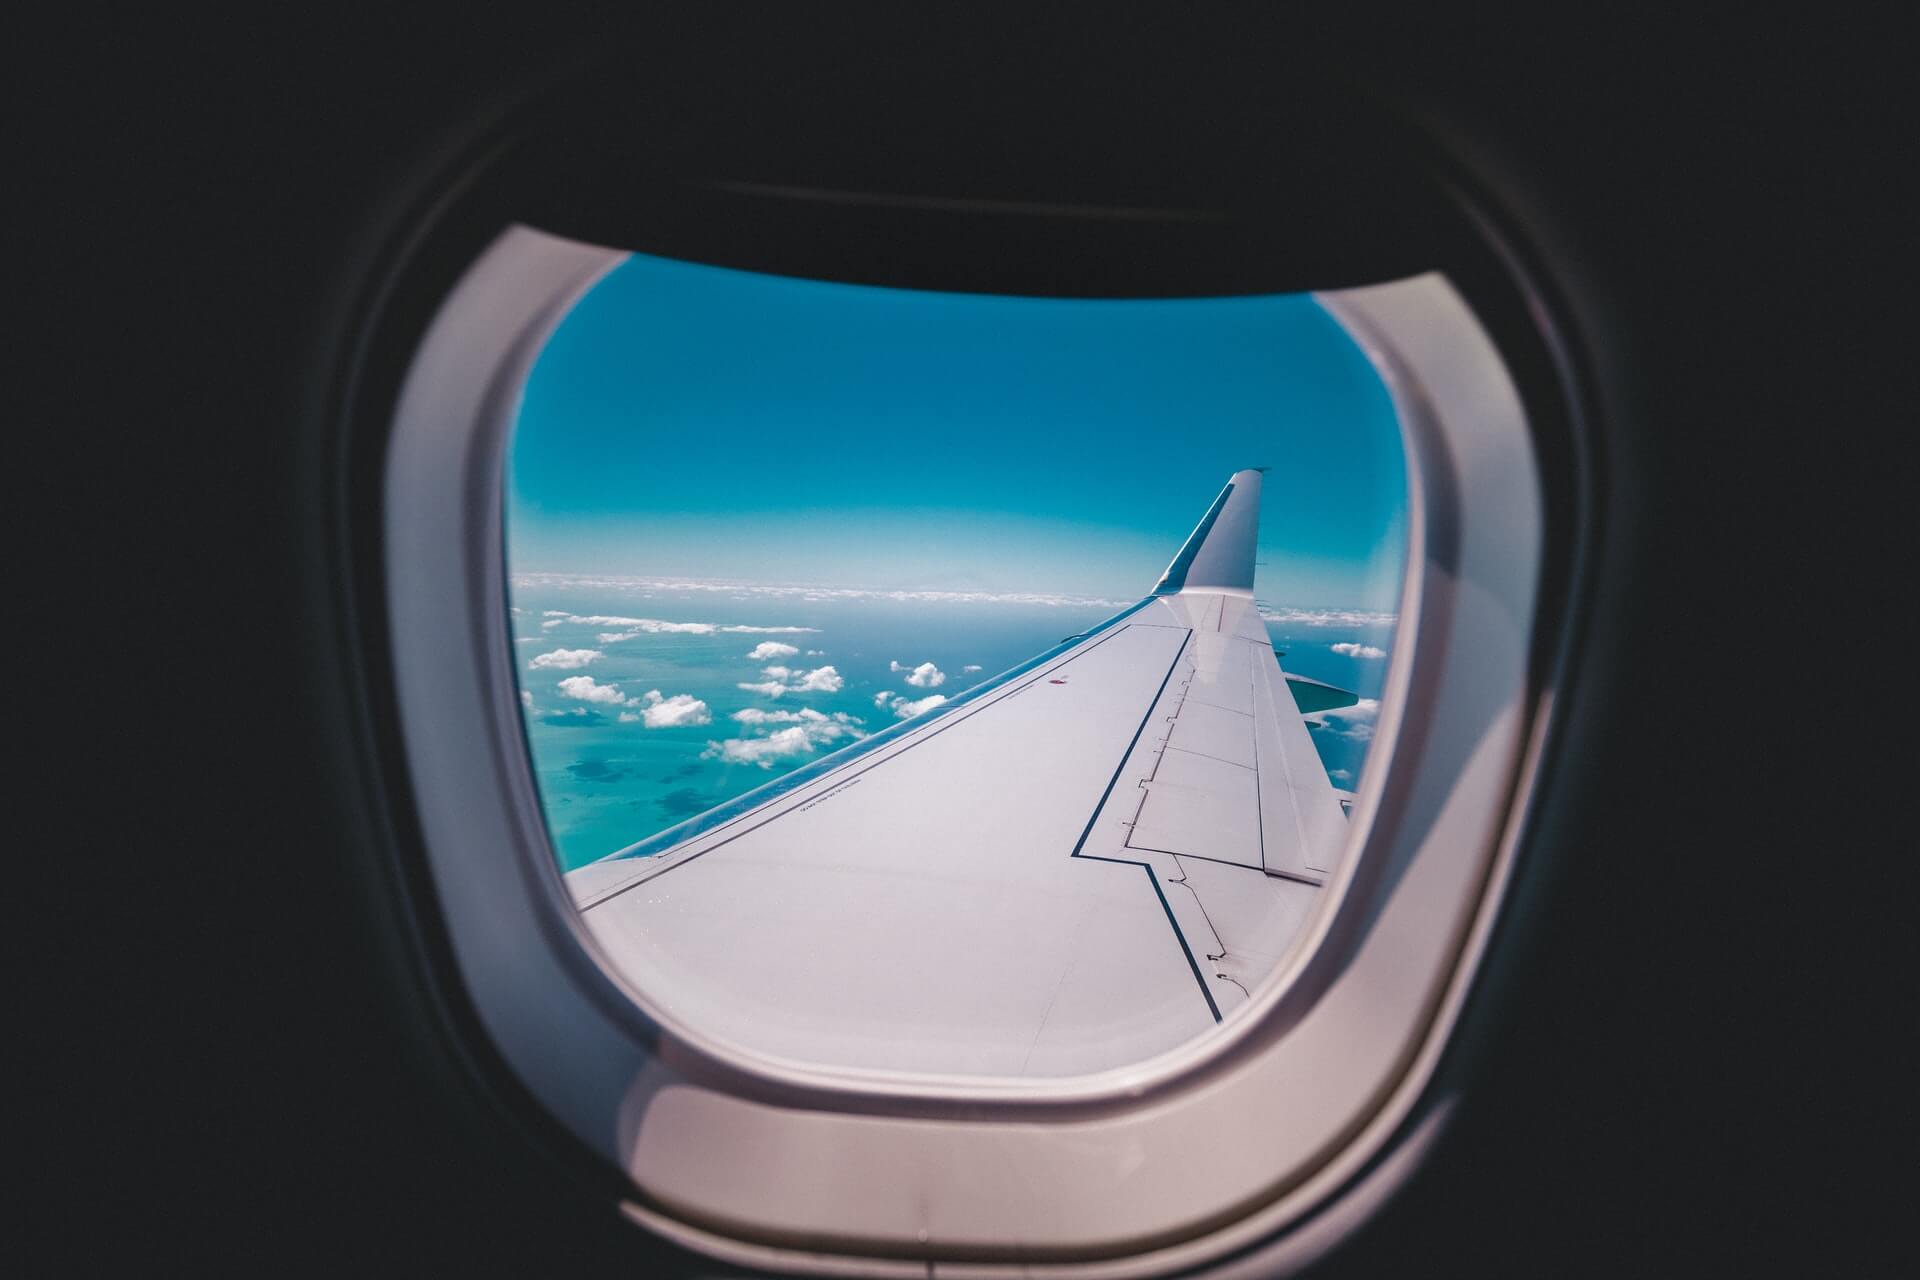 Image looking out of an aeroplane window